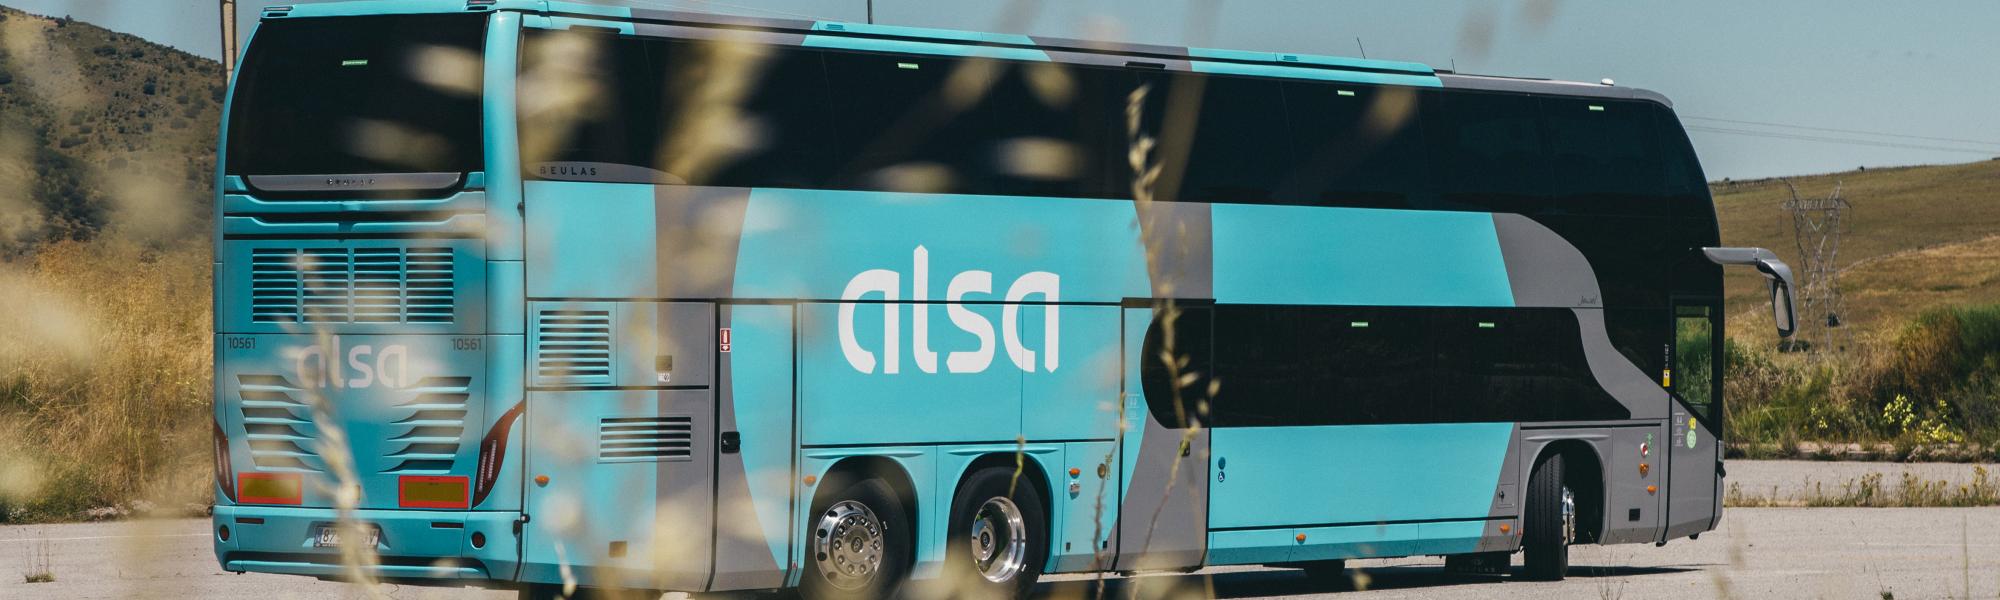 ALSA: Embracing new fuel technologies to decarbonise by 2035, IRU